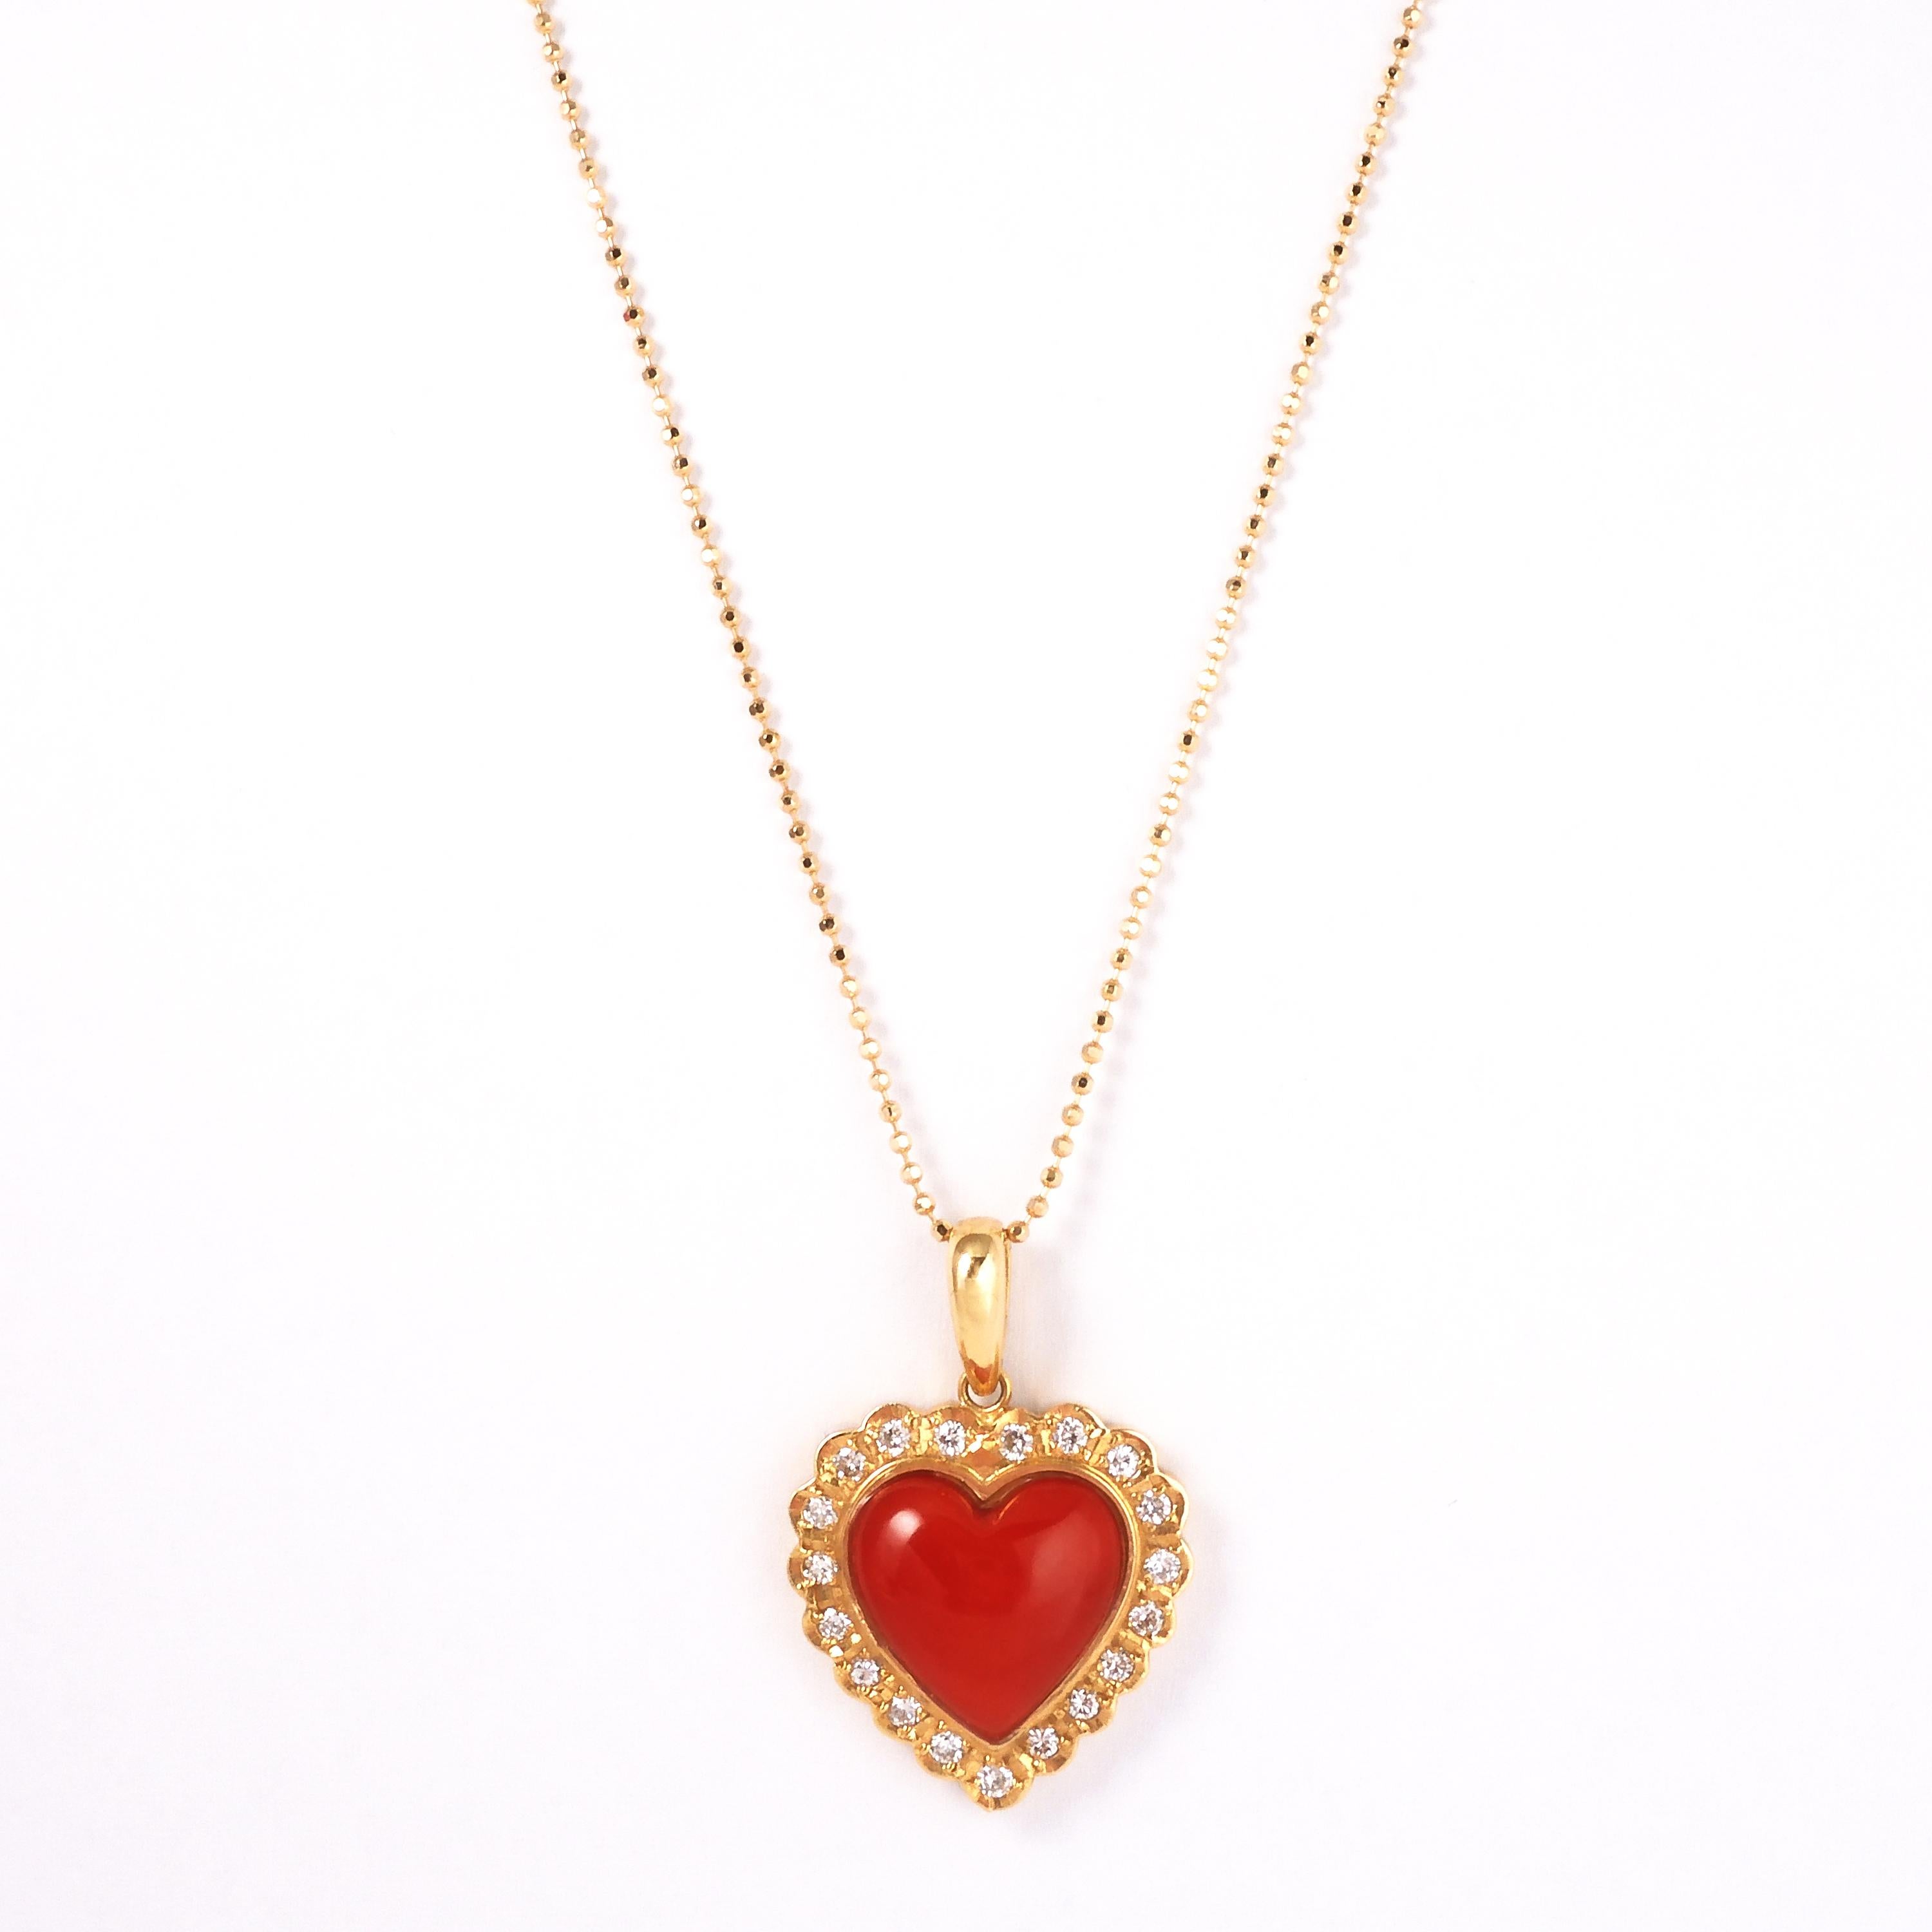 Heart-shaped Chiaka Sango(Oxblood Coral) pendant top set in a well crafted 18 karat yellow gold bezel  is elegantly accented with diamonds weighing approx. 0.24 carats.

This item doesn't include the chain.

About the coral: among the red coral,